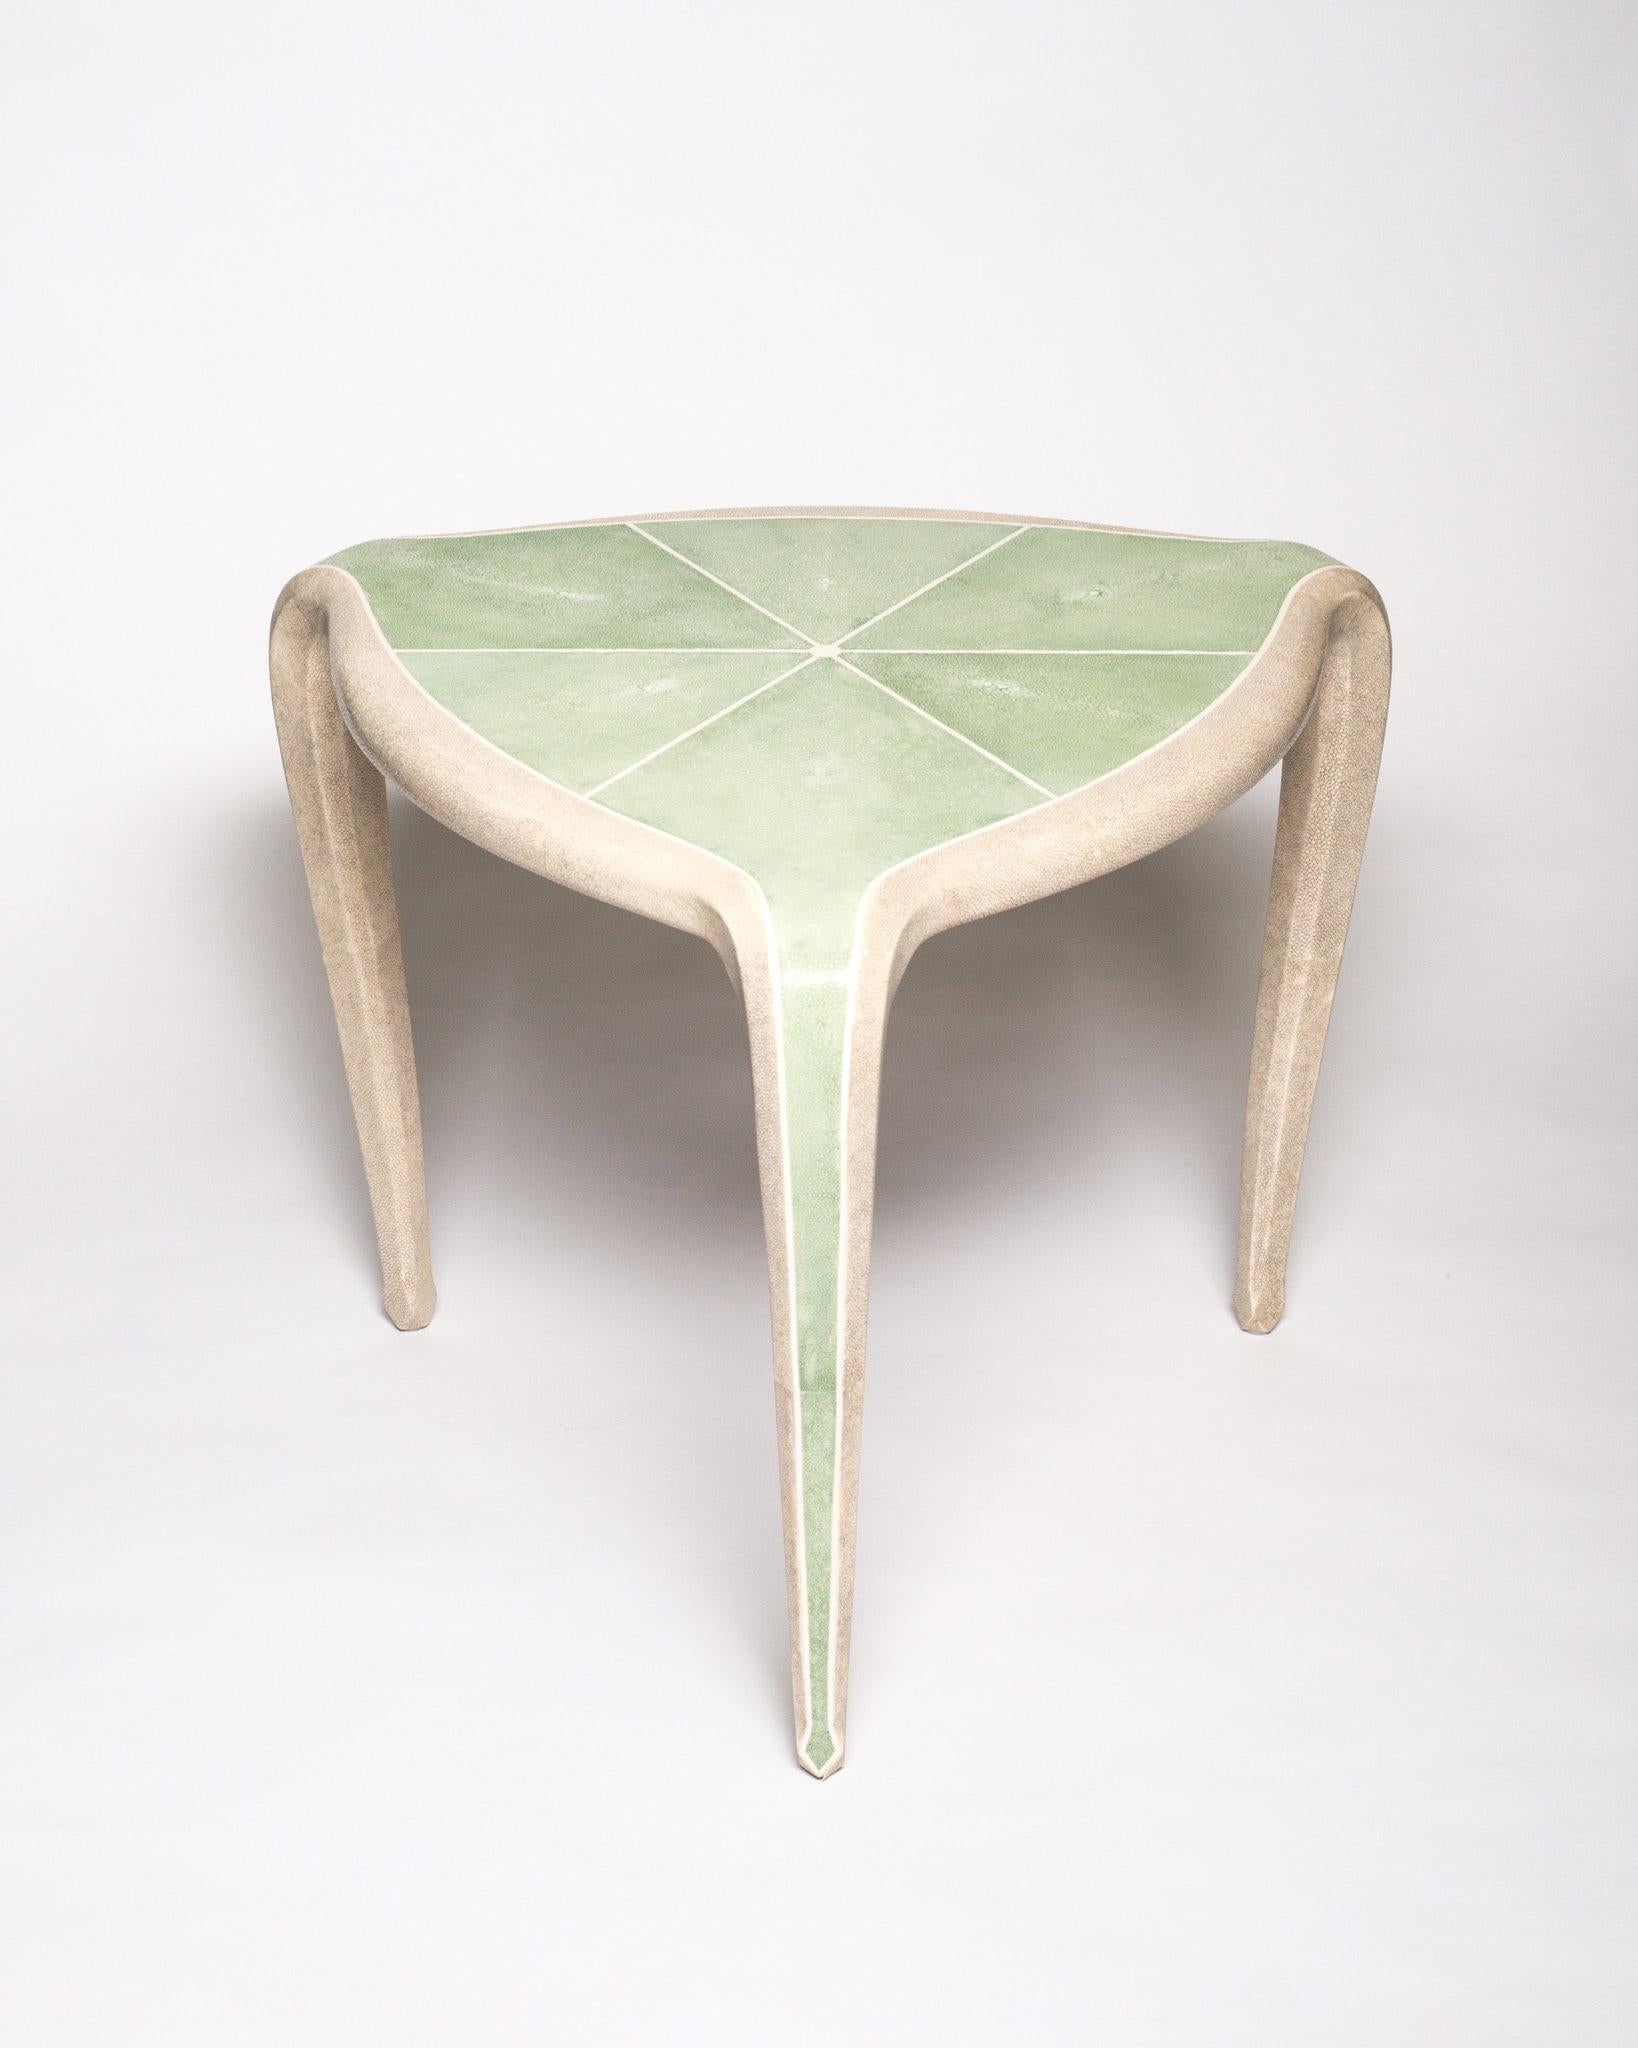 Contemporary Authentic Shagreen Cream and Green Tripod Table In New Condition For Sale In Toronto, ON